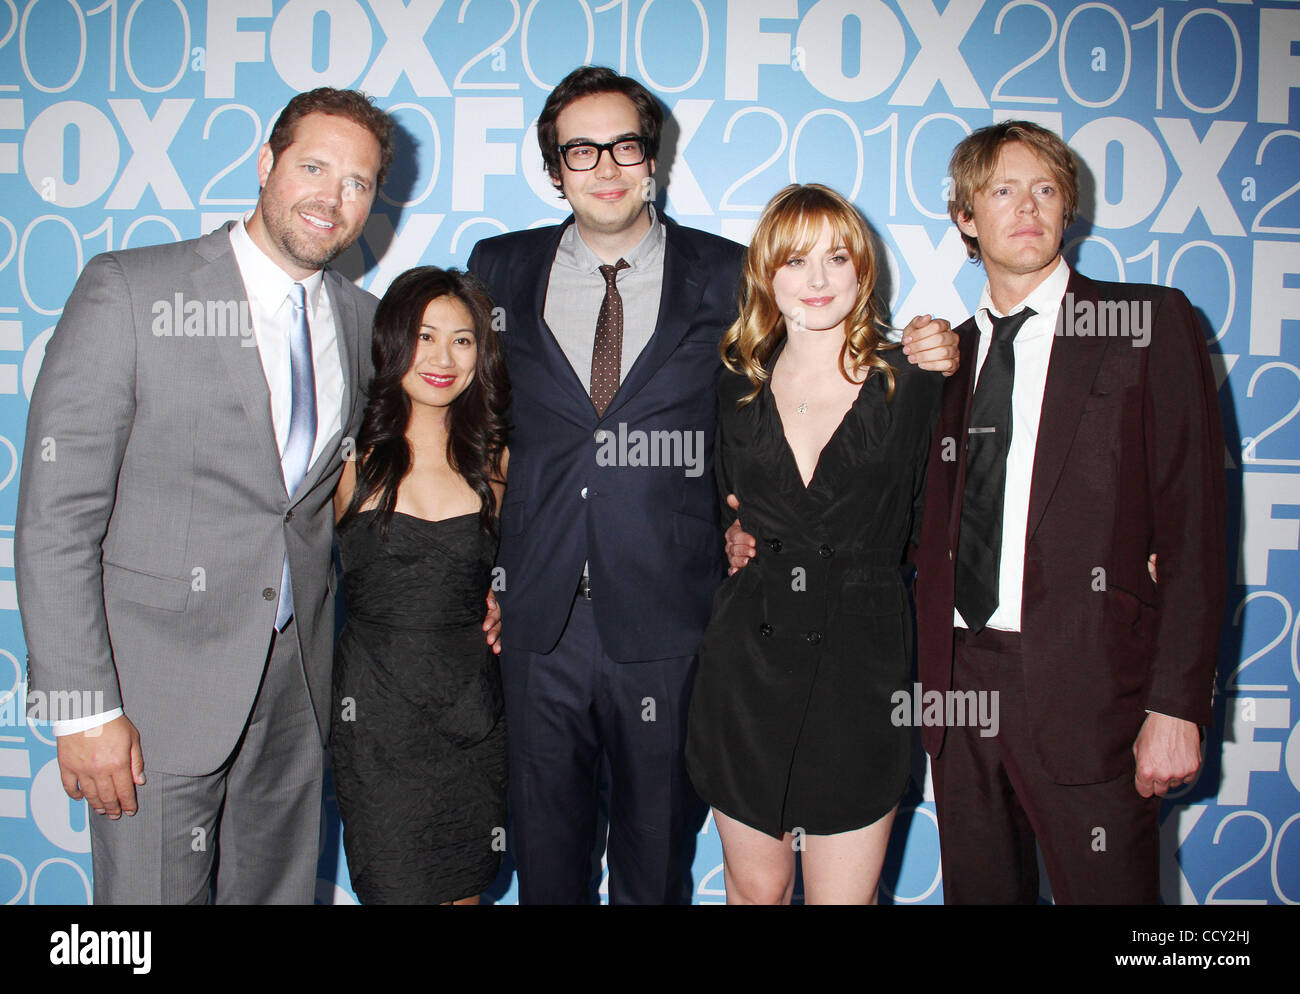 (L-R) Actors DAVID DENMAN, LIZA LAPIRA, NELSON FRANKLIN, ALEXANDRA BRECKENRIDGE and KRIS MARSHALL attend the FOX 2010 Upfront after-party held at Wollman Rink in Central Park. Stock Photo